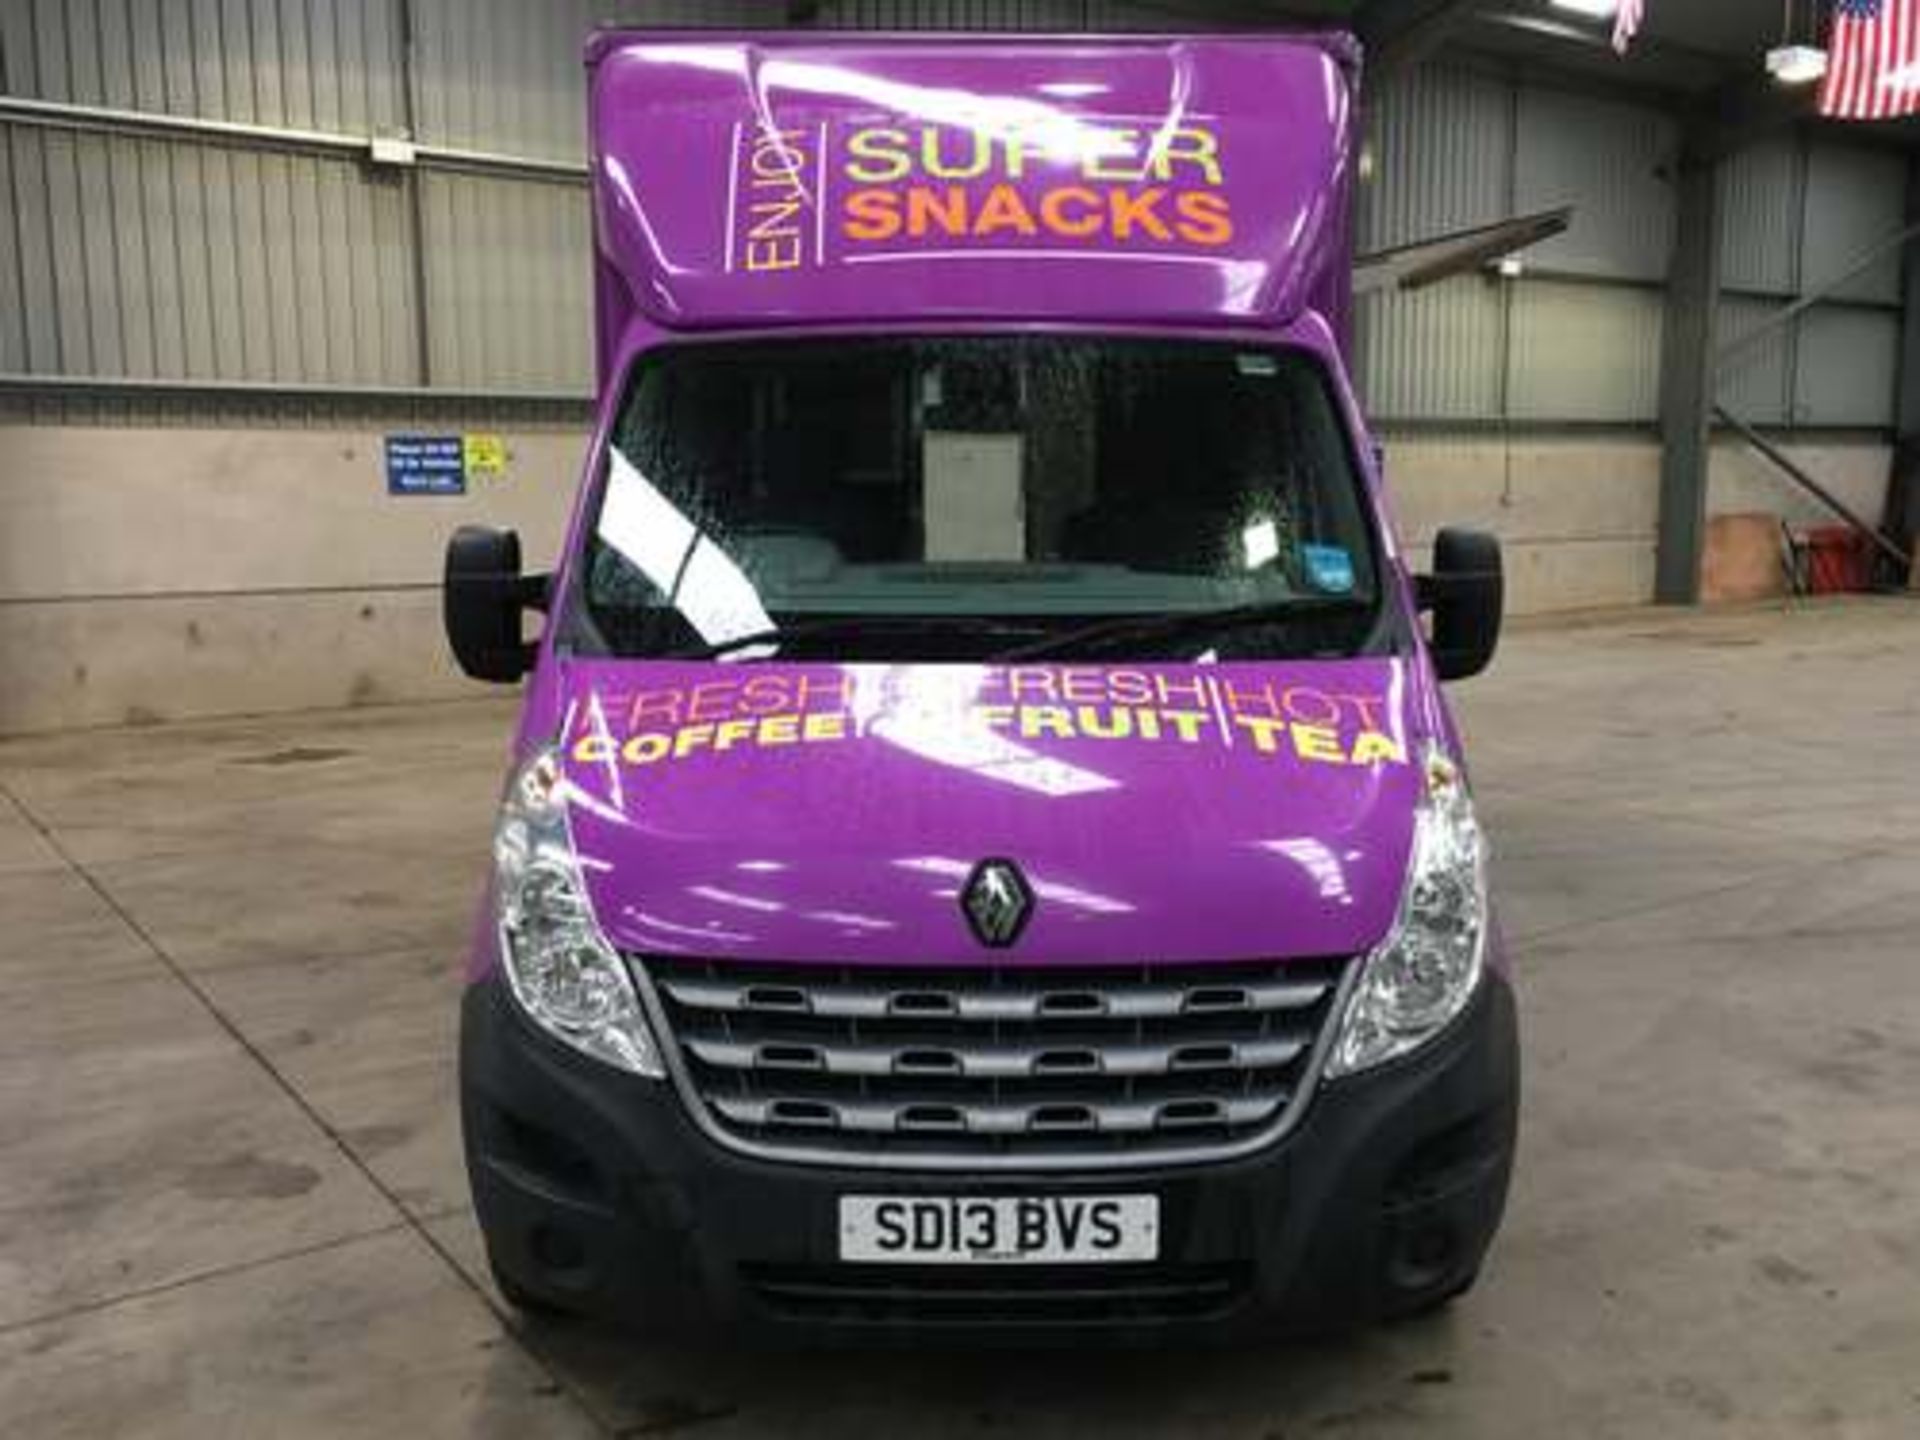 RENAULT MASTER LL35 DCI 125 - 2298cc - Image 8 of 33